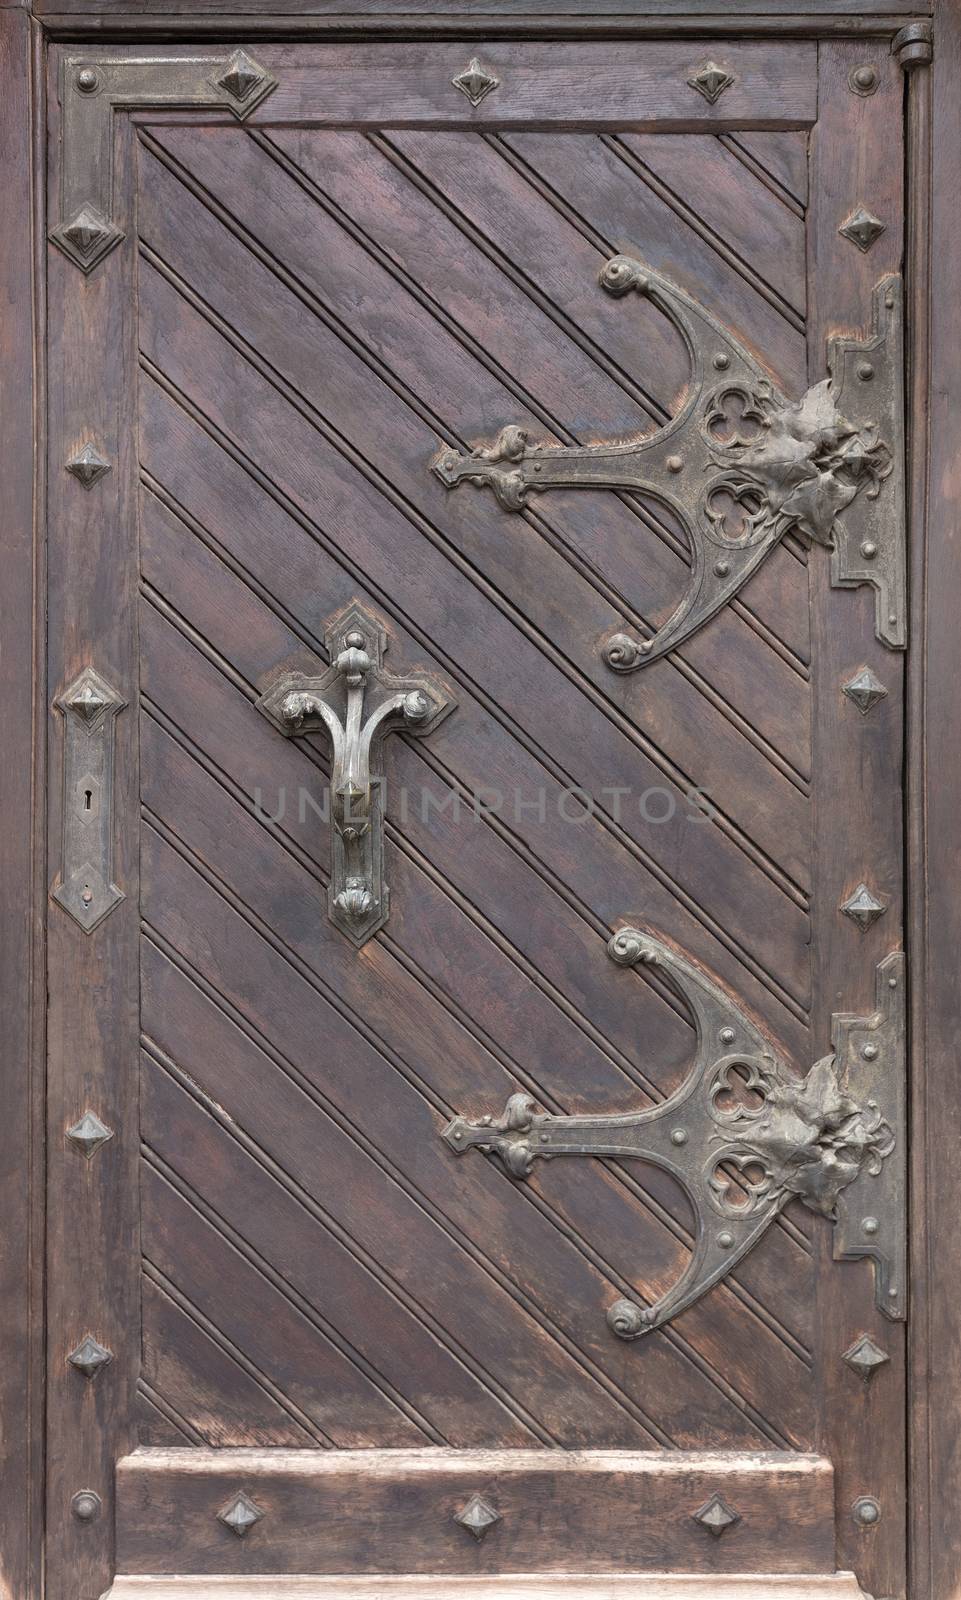 Ancient antique wooden doors with wrought iron loops and cross bars. by Sergii